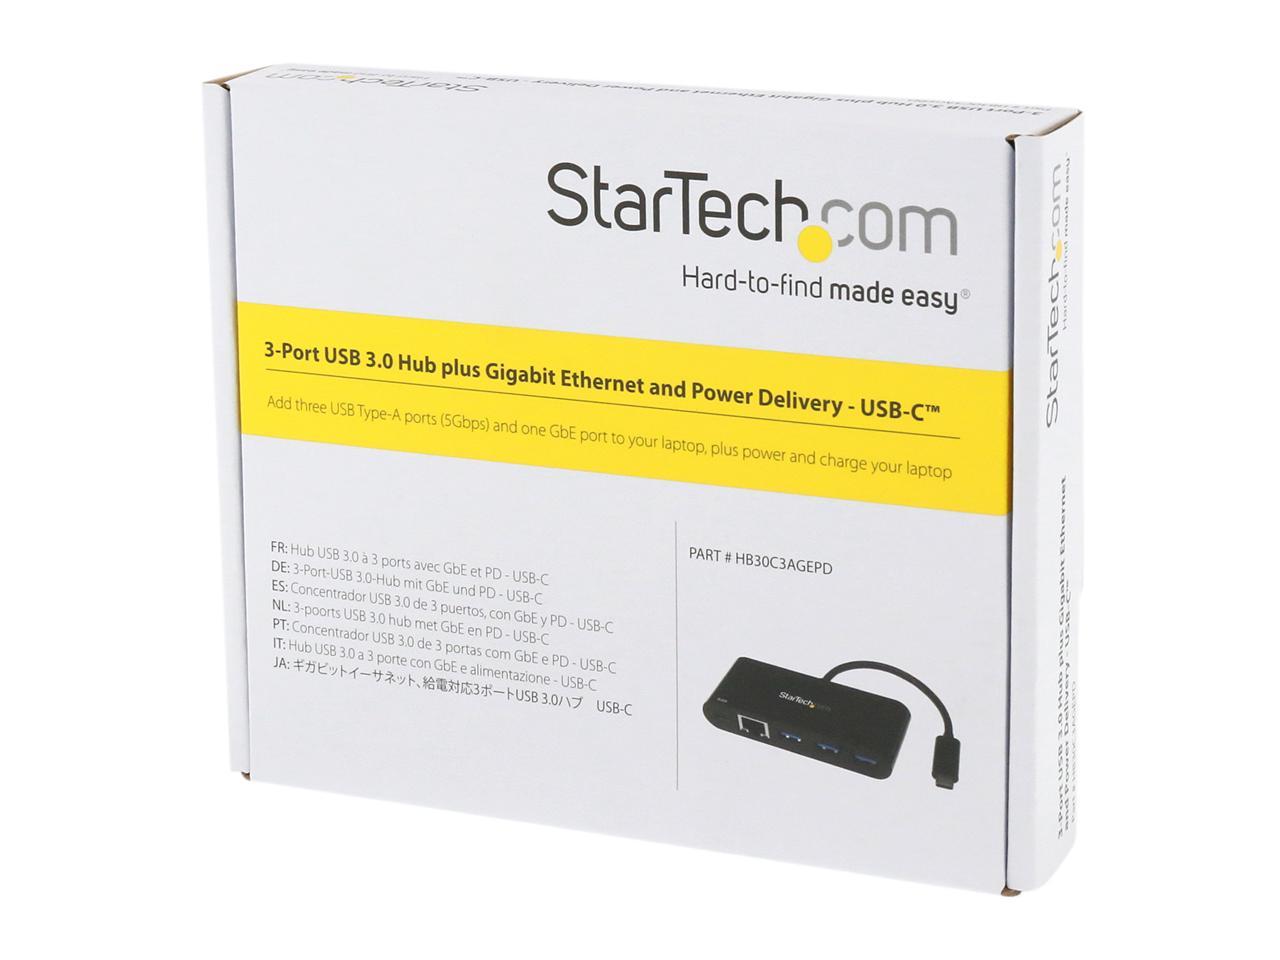 StarTech HB30C3AGEPD 3 Port USB C Hub w/ GbE & PD 2.0 - USB-C to 2 x USB-A - USB 3.0 Hub - USB Port Expander - USB Port Hub w/ GbE & Power Delivery - image 5 of 5